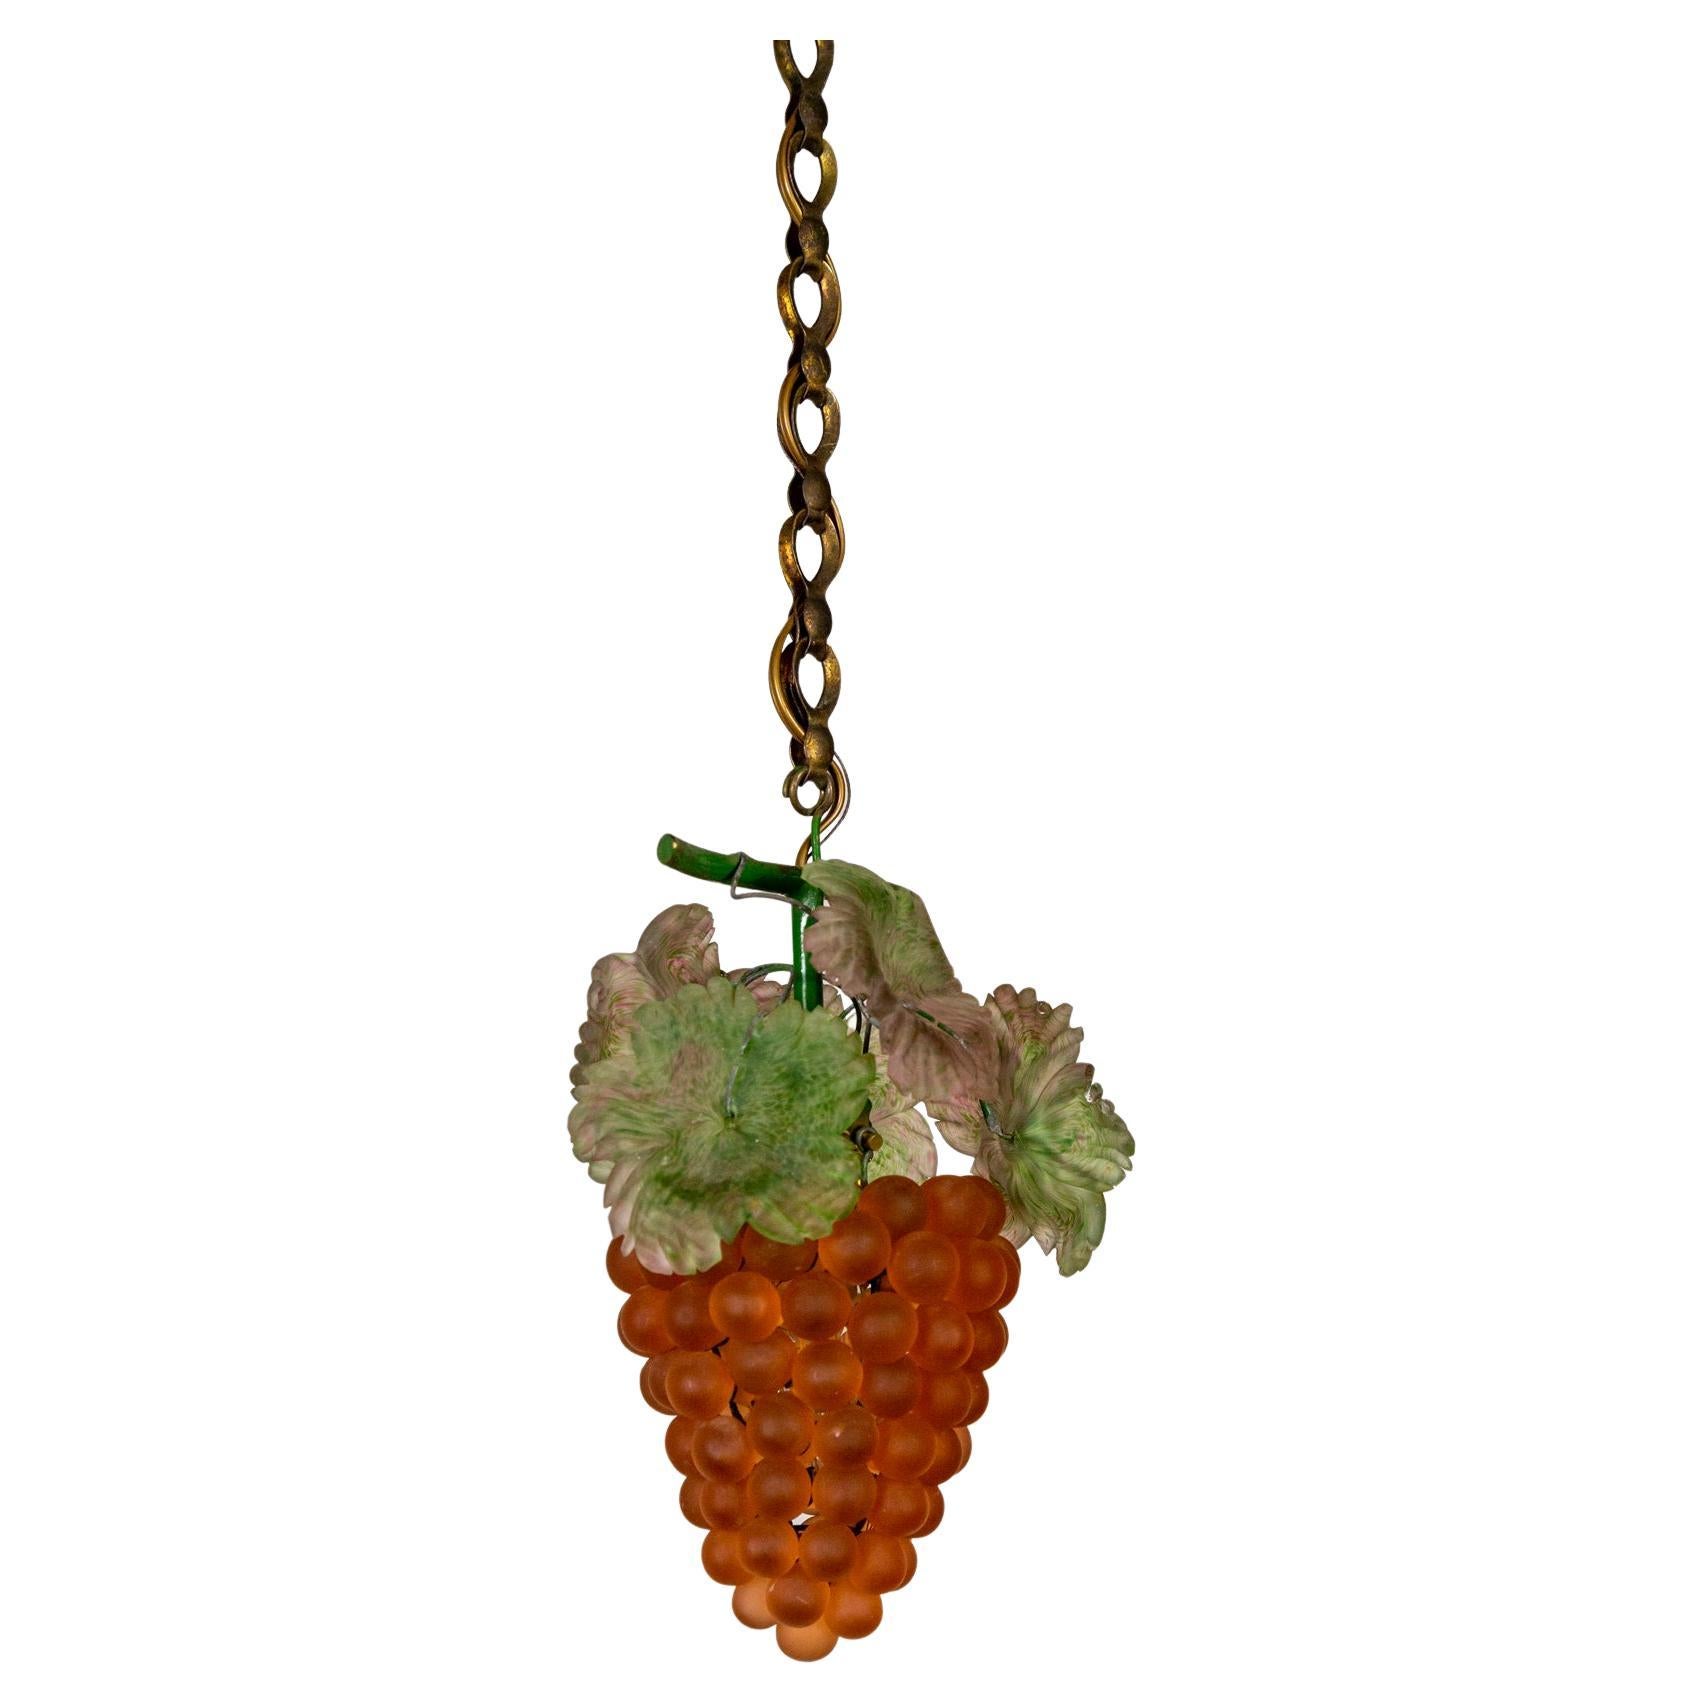 A vibrant pendant light from the 1920s; ruddy-red to amber, Venetian glass grape bunches with detailed green and pink leaves. The grapes are hanging from a green, patinated brass 